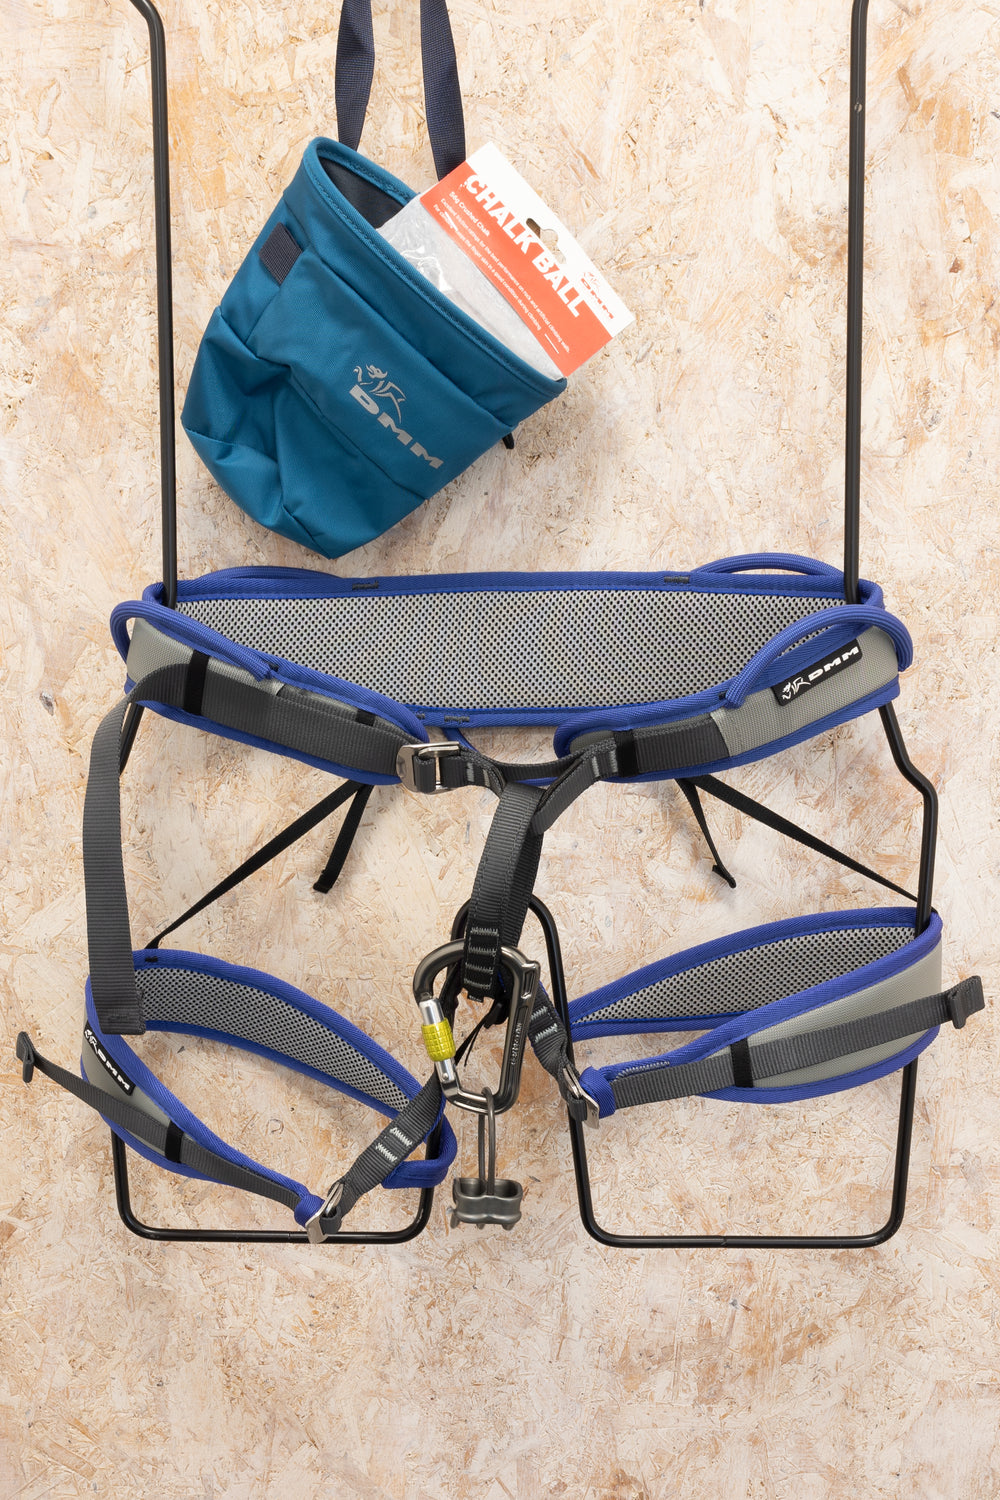 DMM - Viper Harness Pack